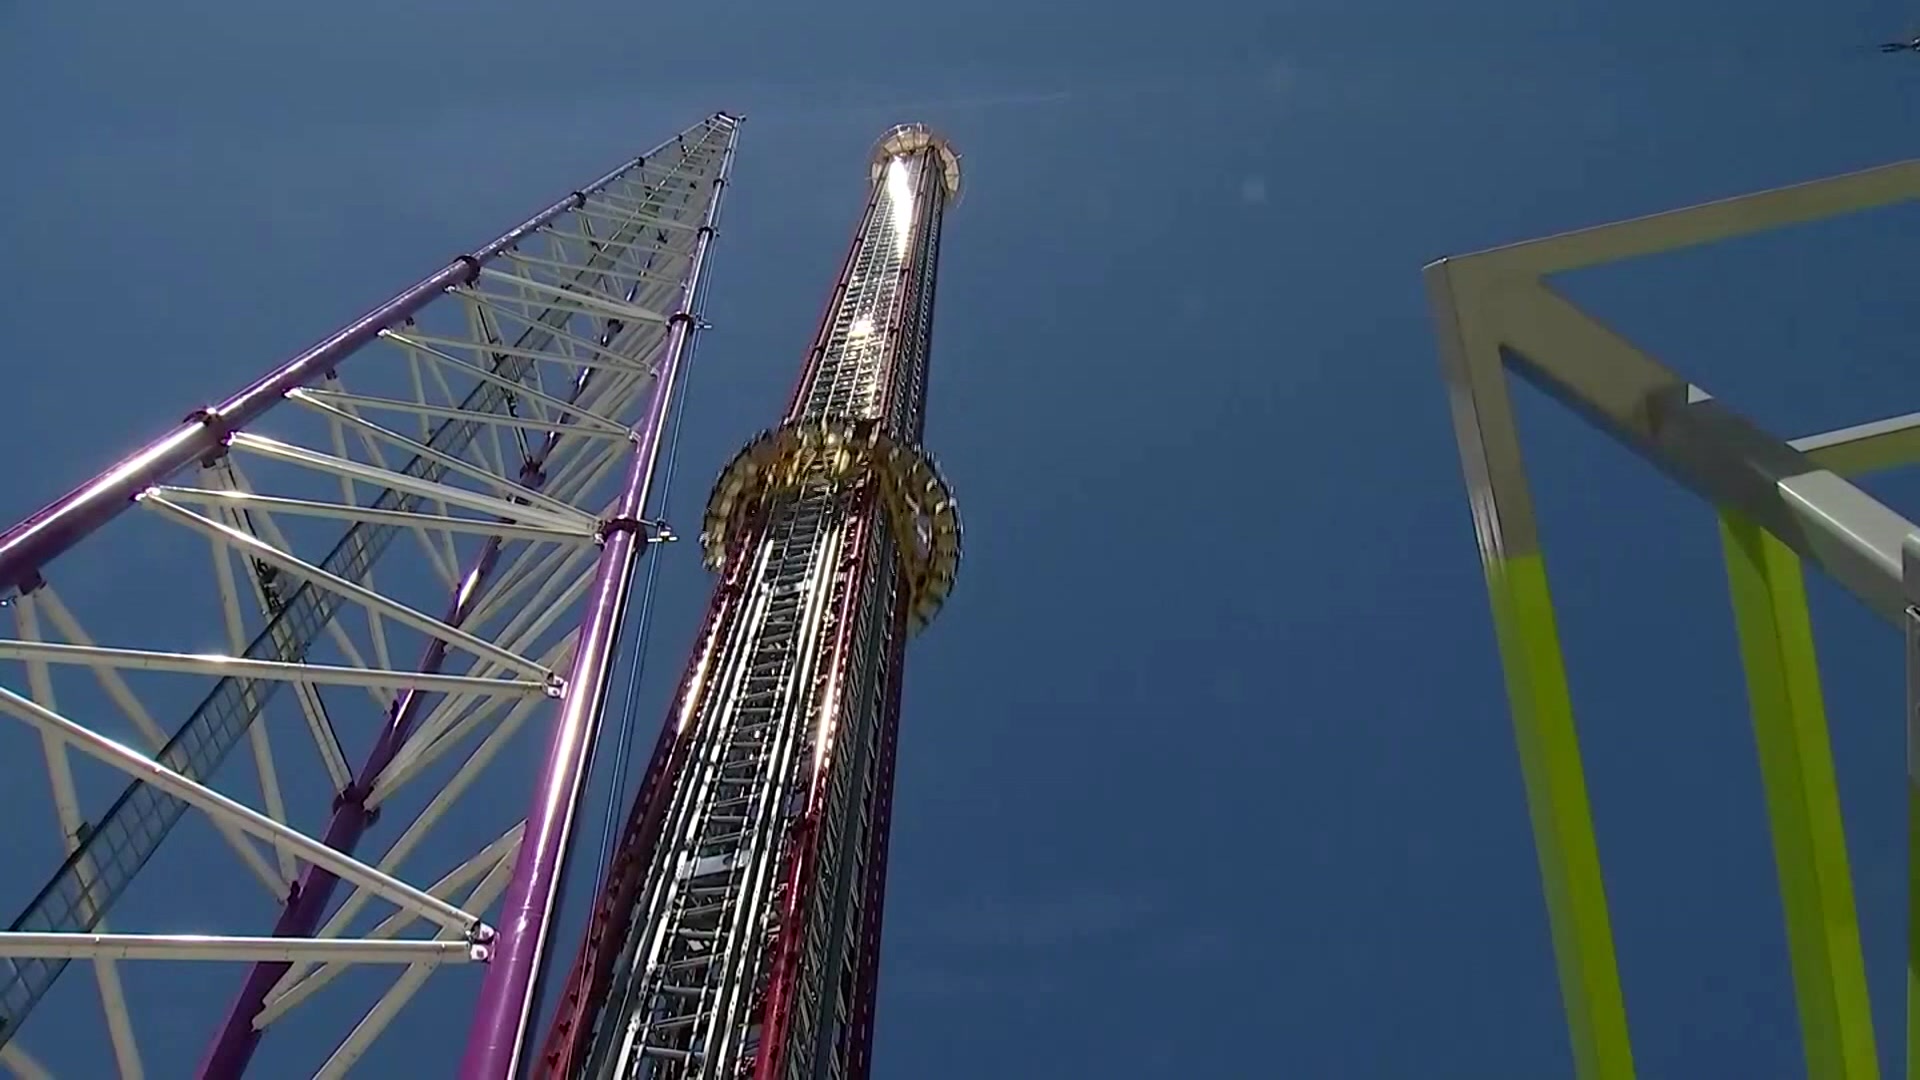 Report: Tyre Sampson Fell To His Death Midway Through Orlando Park’s Drop Ride Plunge